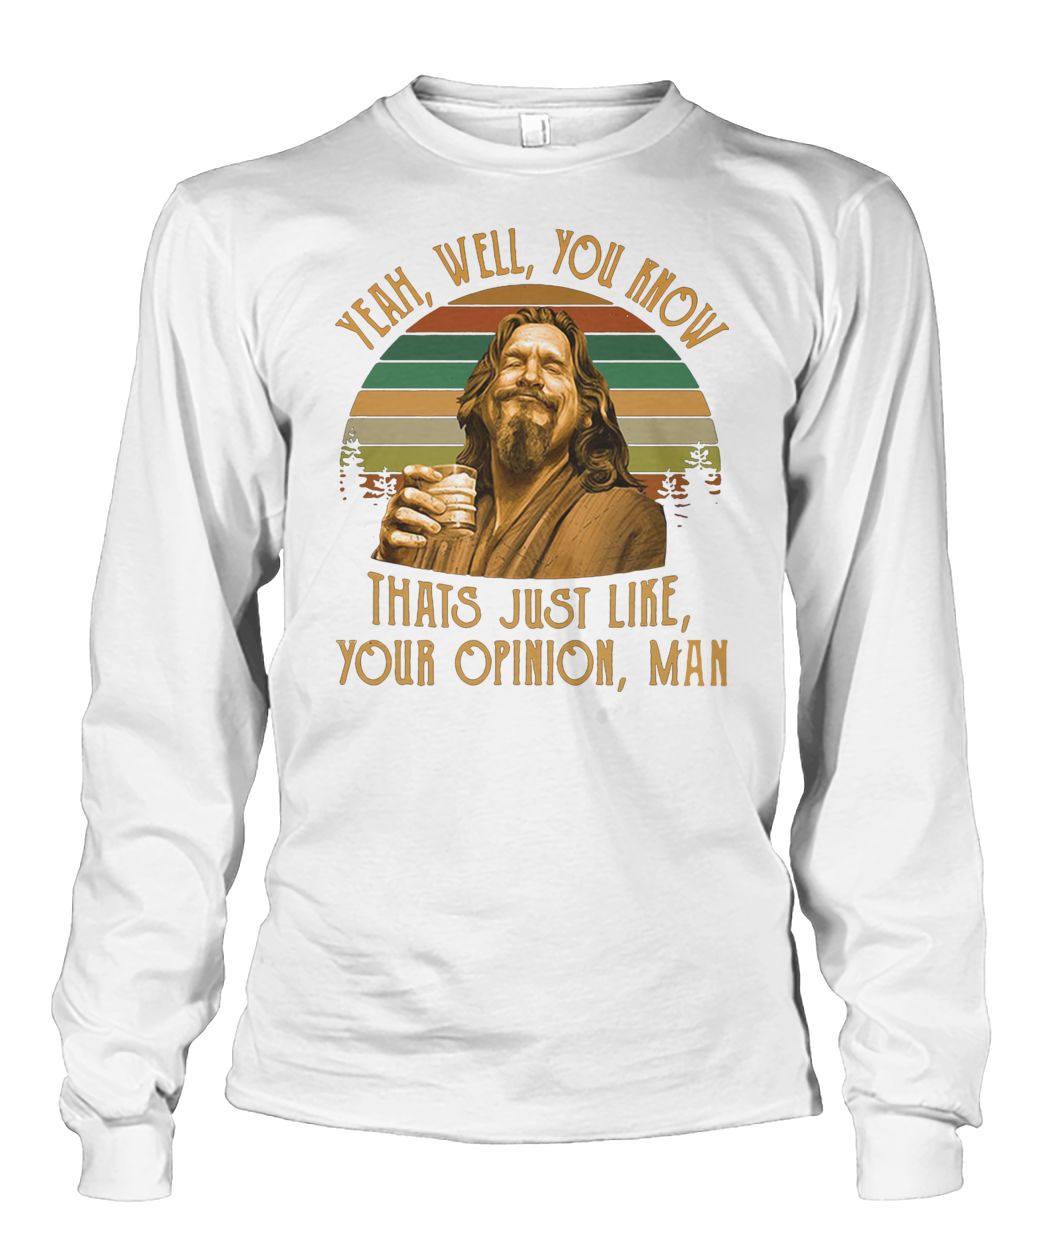 The big lebowski jeff bridges yeah well you know thats just like your opinion man vintage unisex long sleeve